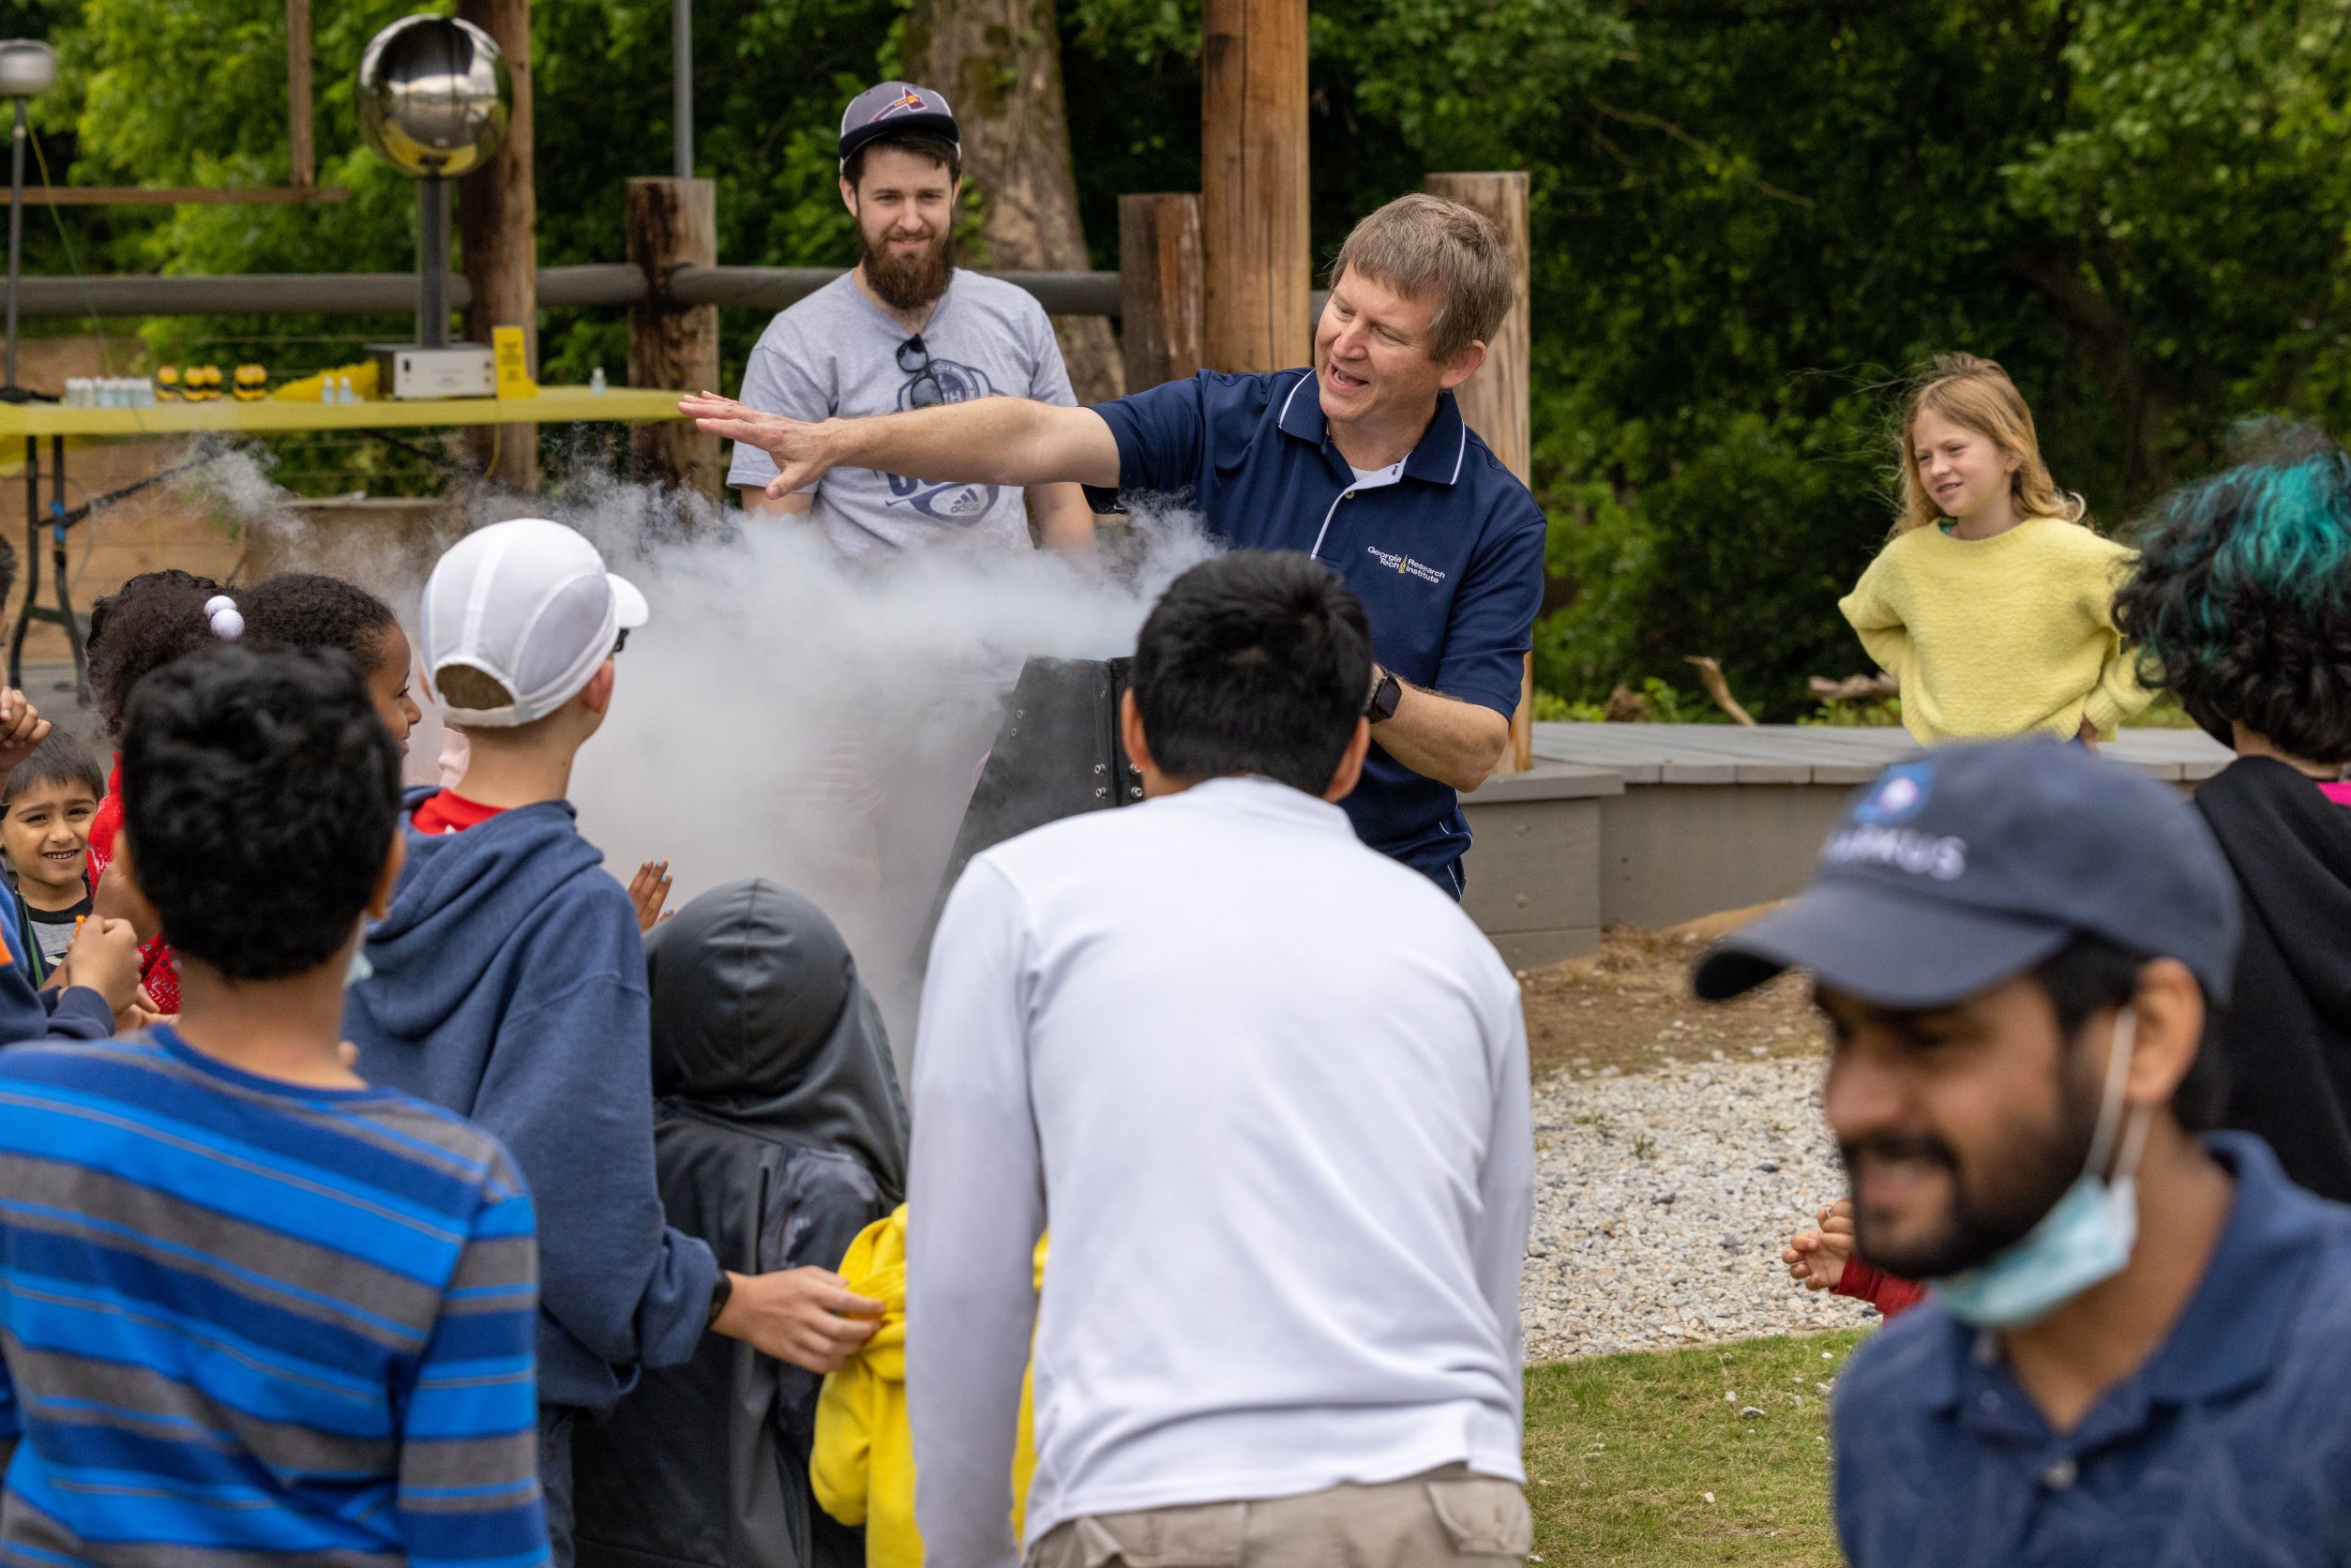 A group of kids huddled around a cloud of fog created by the liquid nitrogen demonstration.